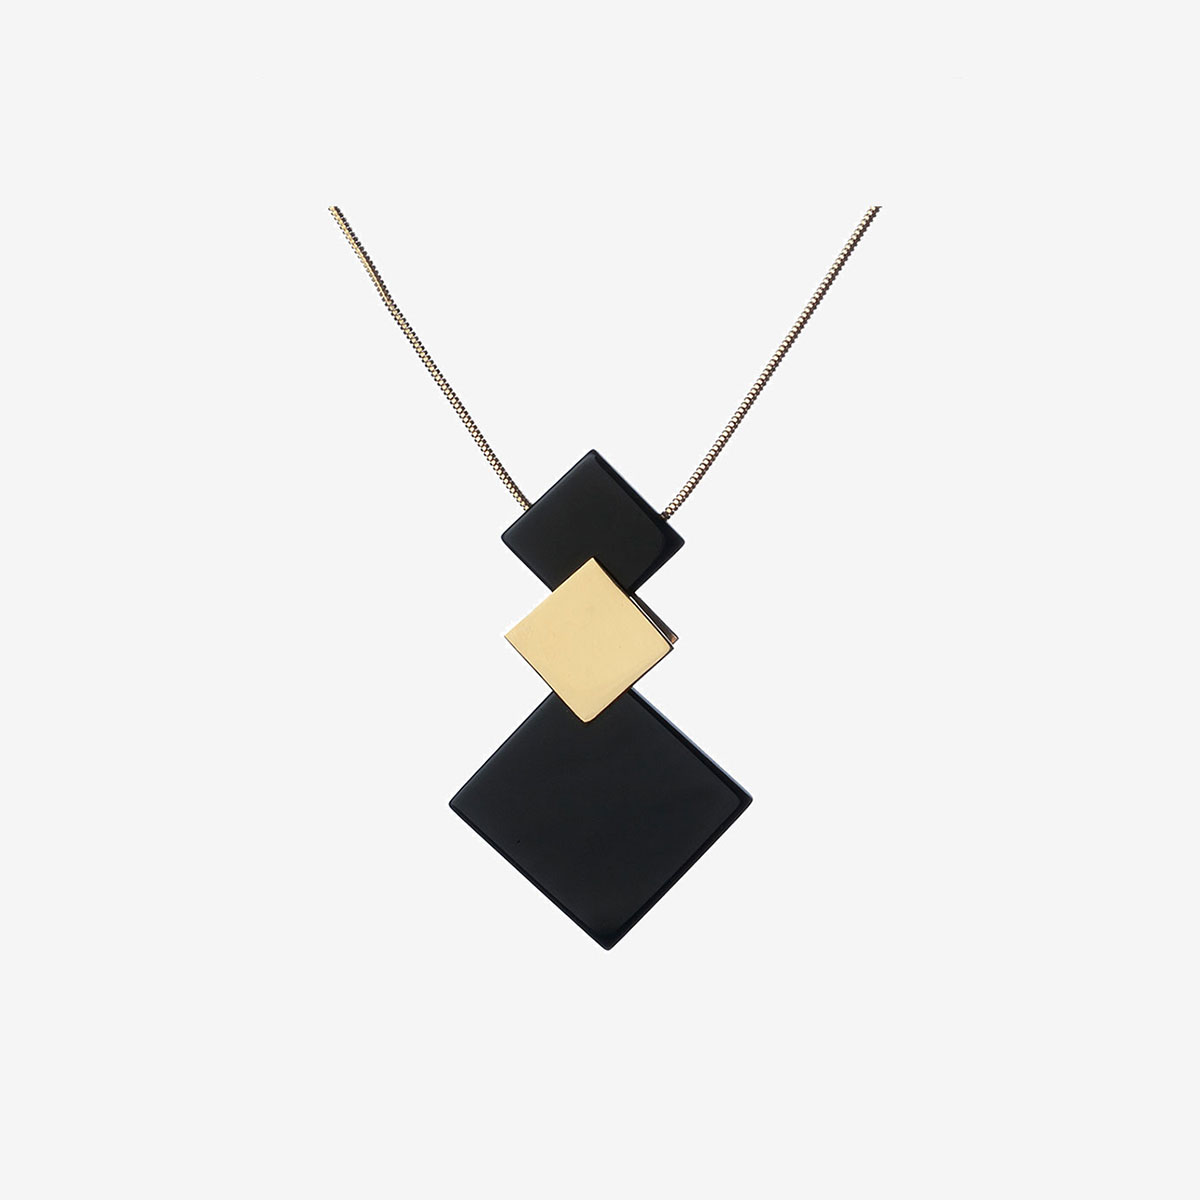 Handmade Toy necklace in gold, sterling silver and onyx designed by Belen Bajo